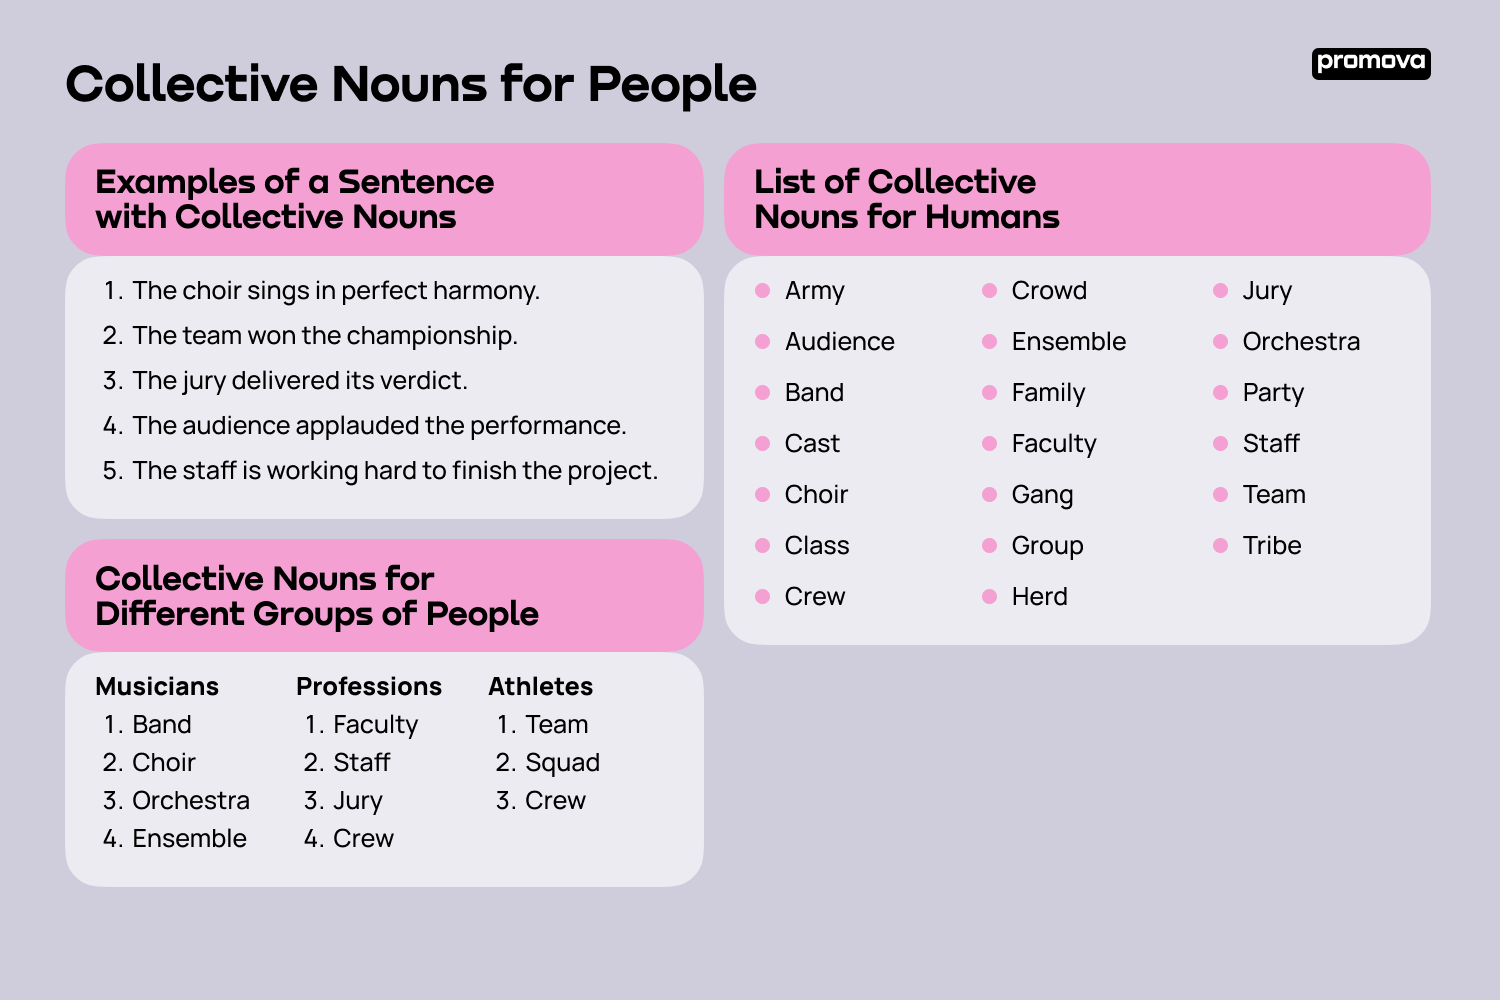 Examples of a Sentence with Collective Nouns